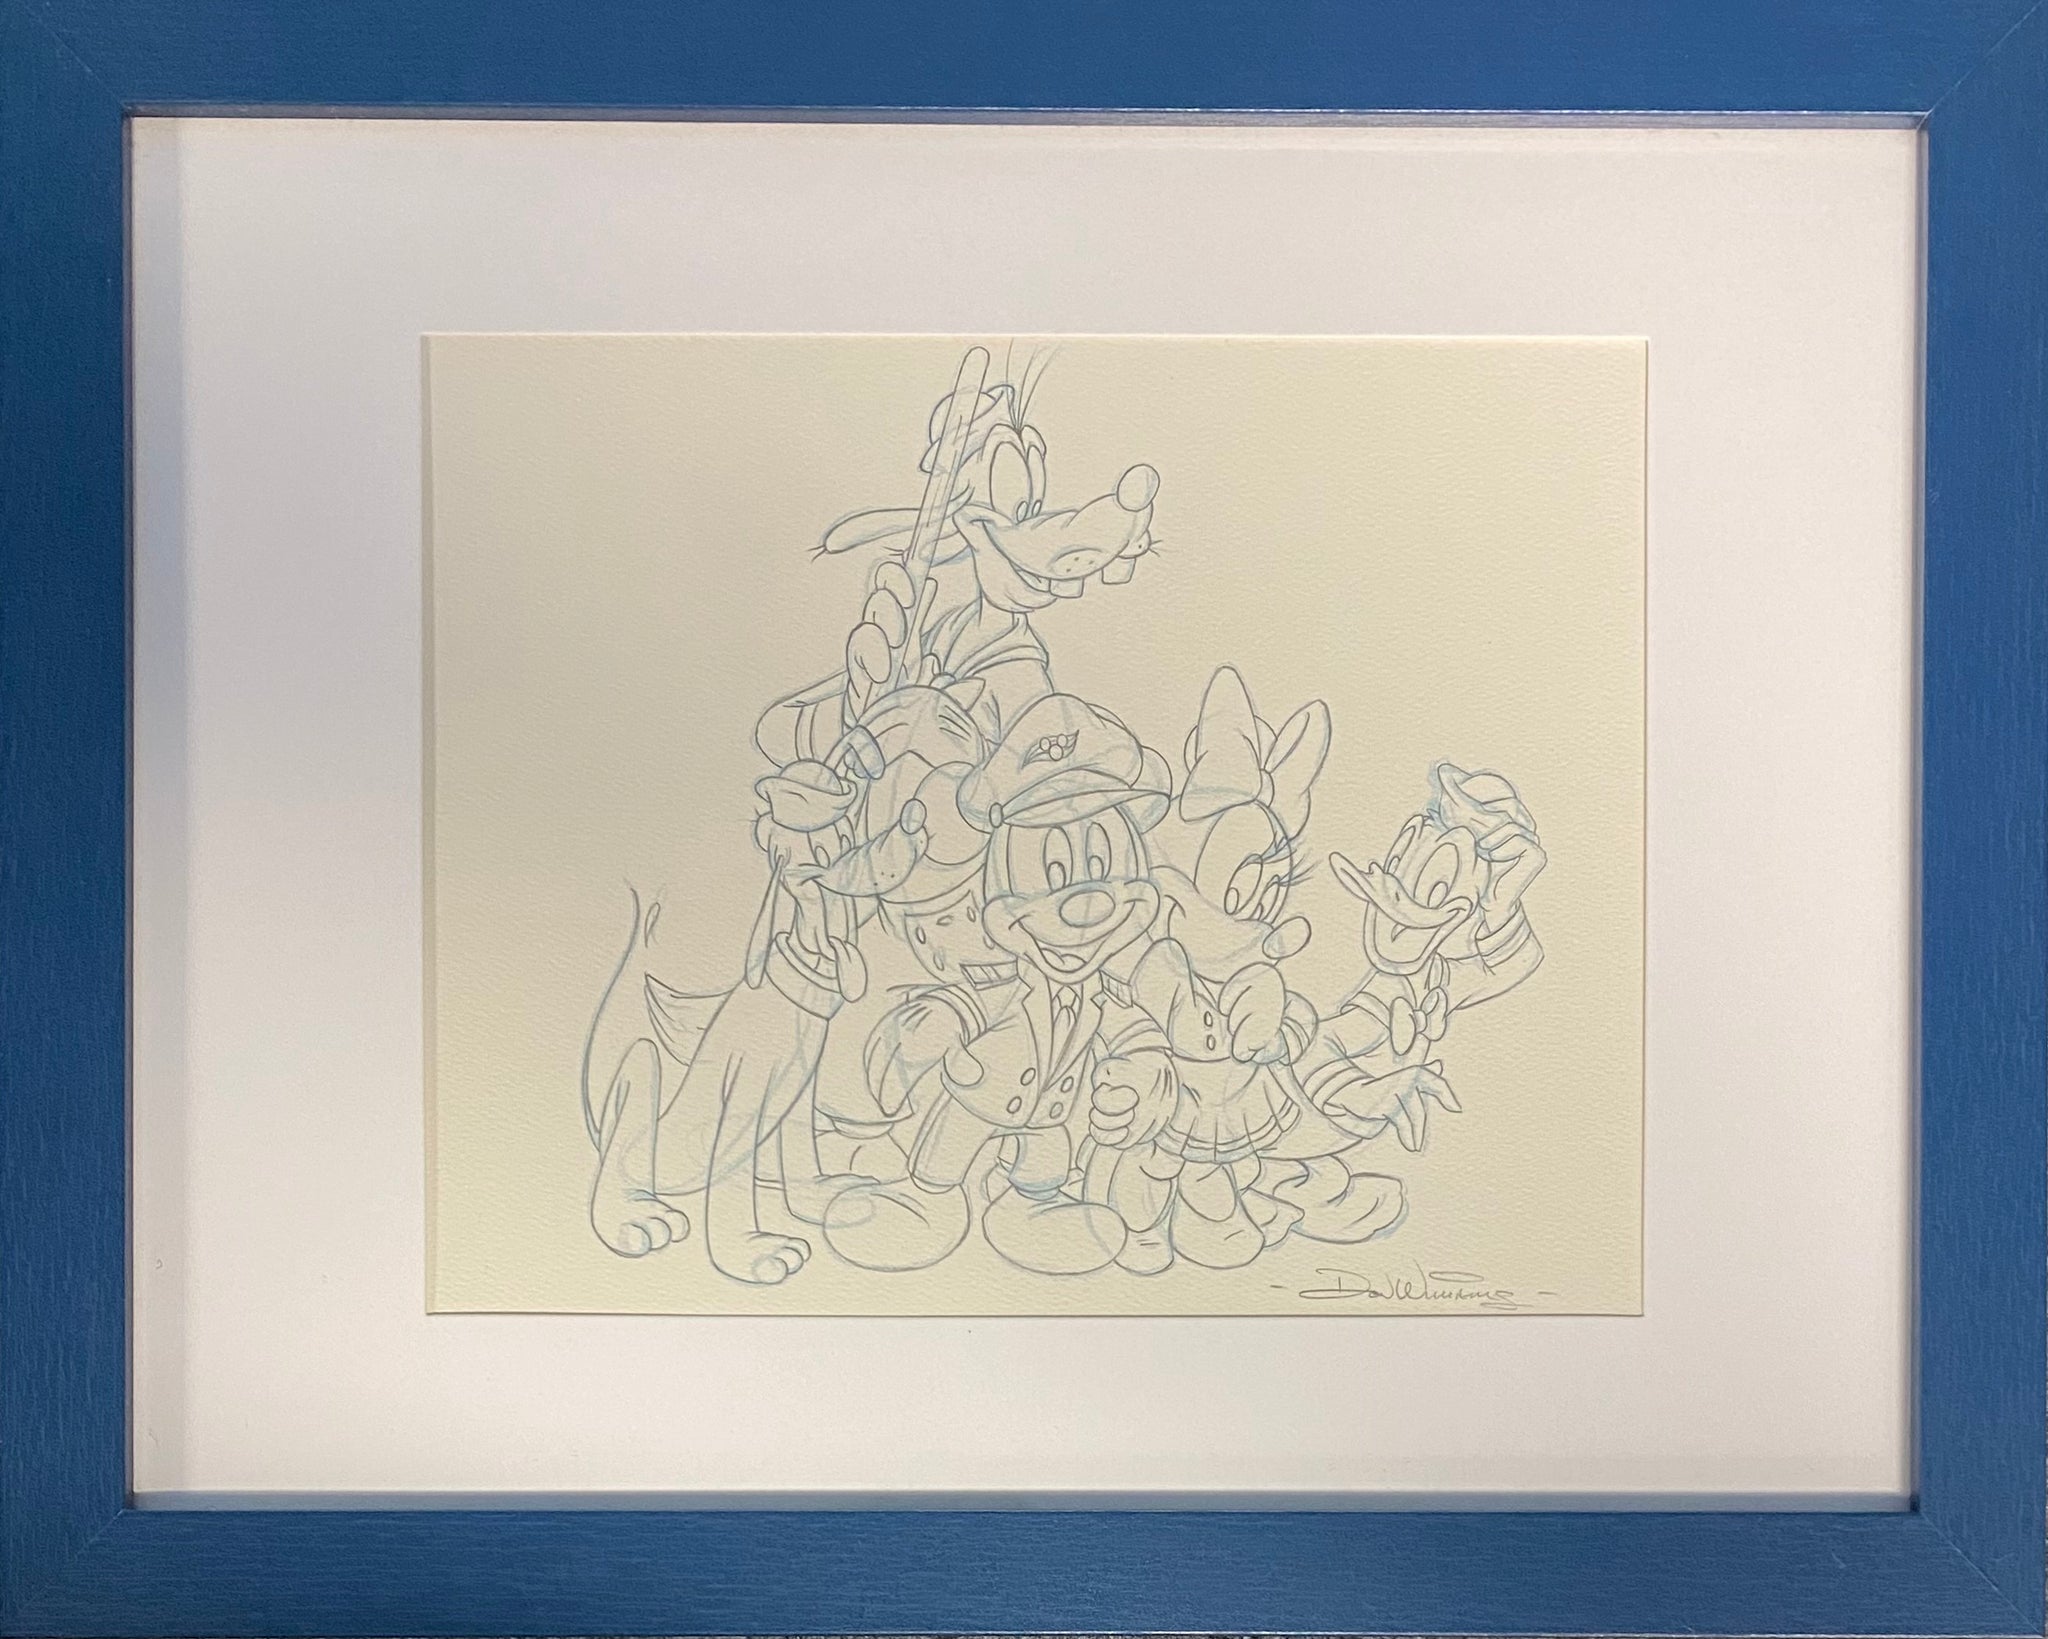 Disney Cruise Line Crew- Framed Lithograph By Don "Ducky" Williams - Signed Certificate Inspired by Disney Cruise Line